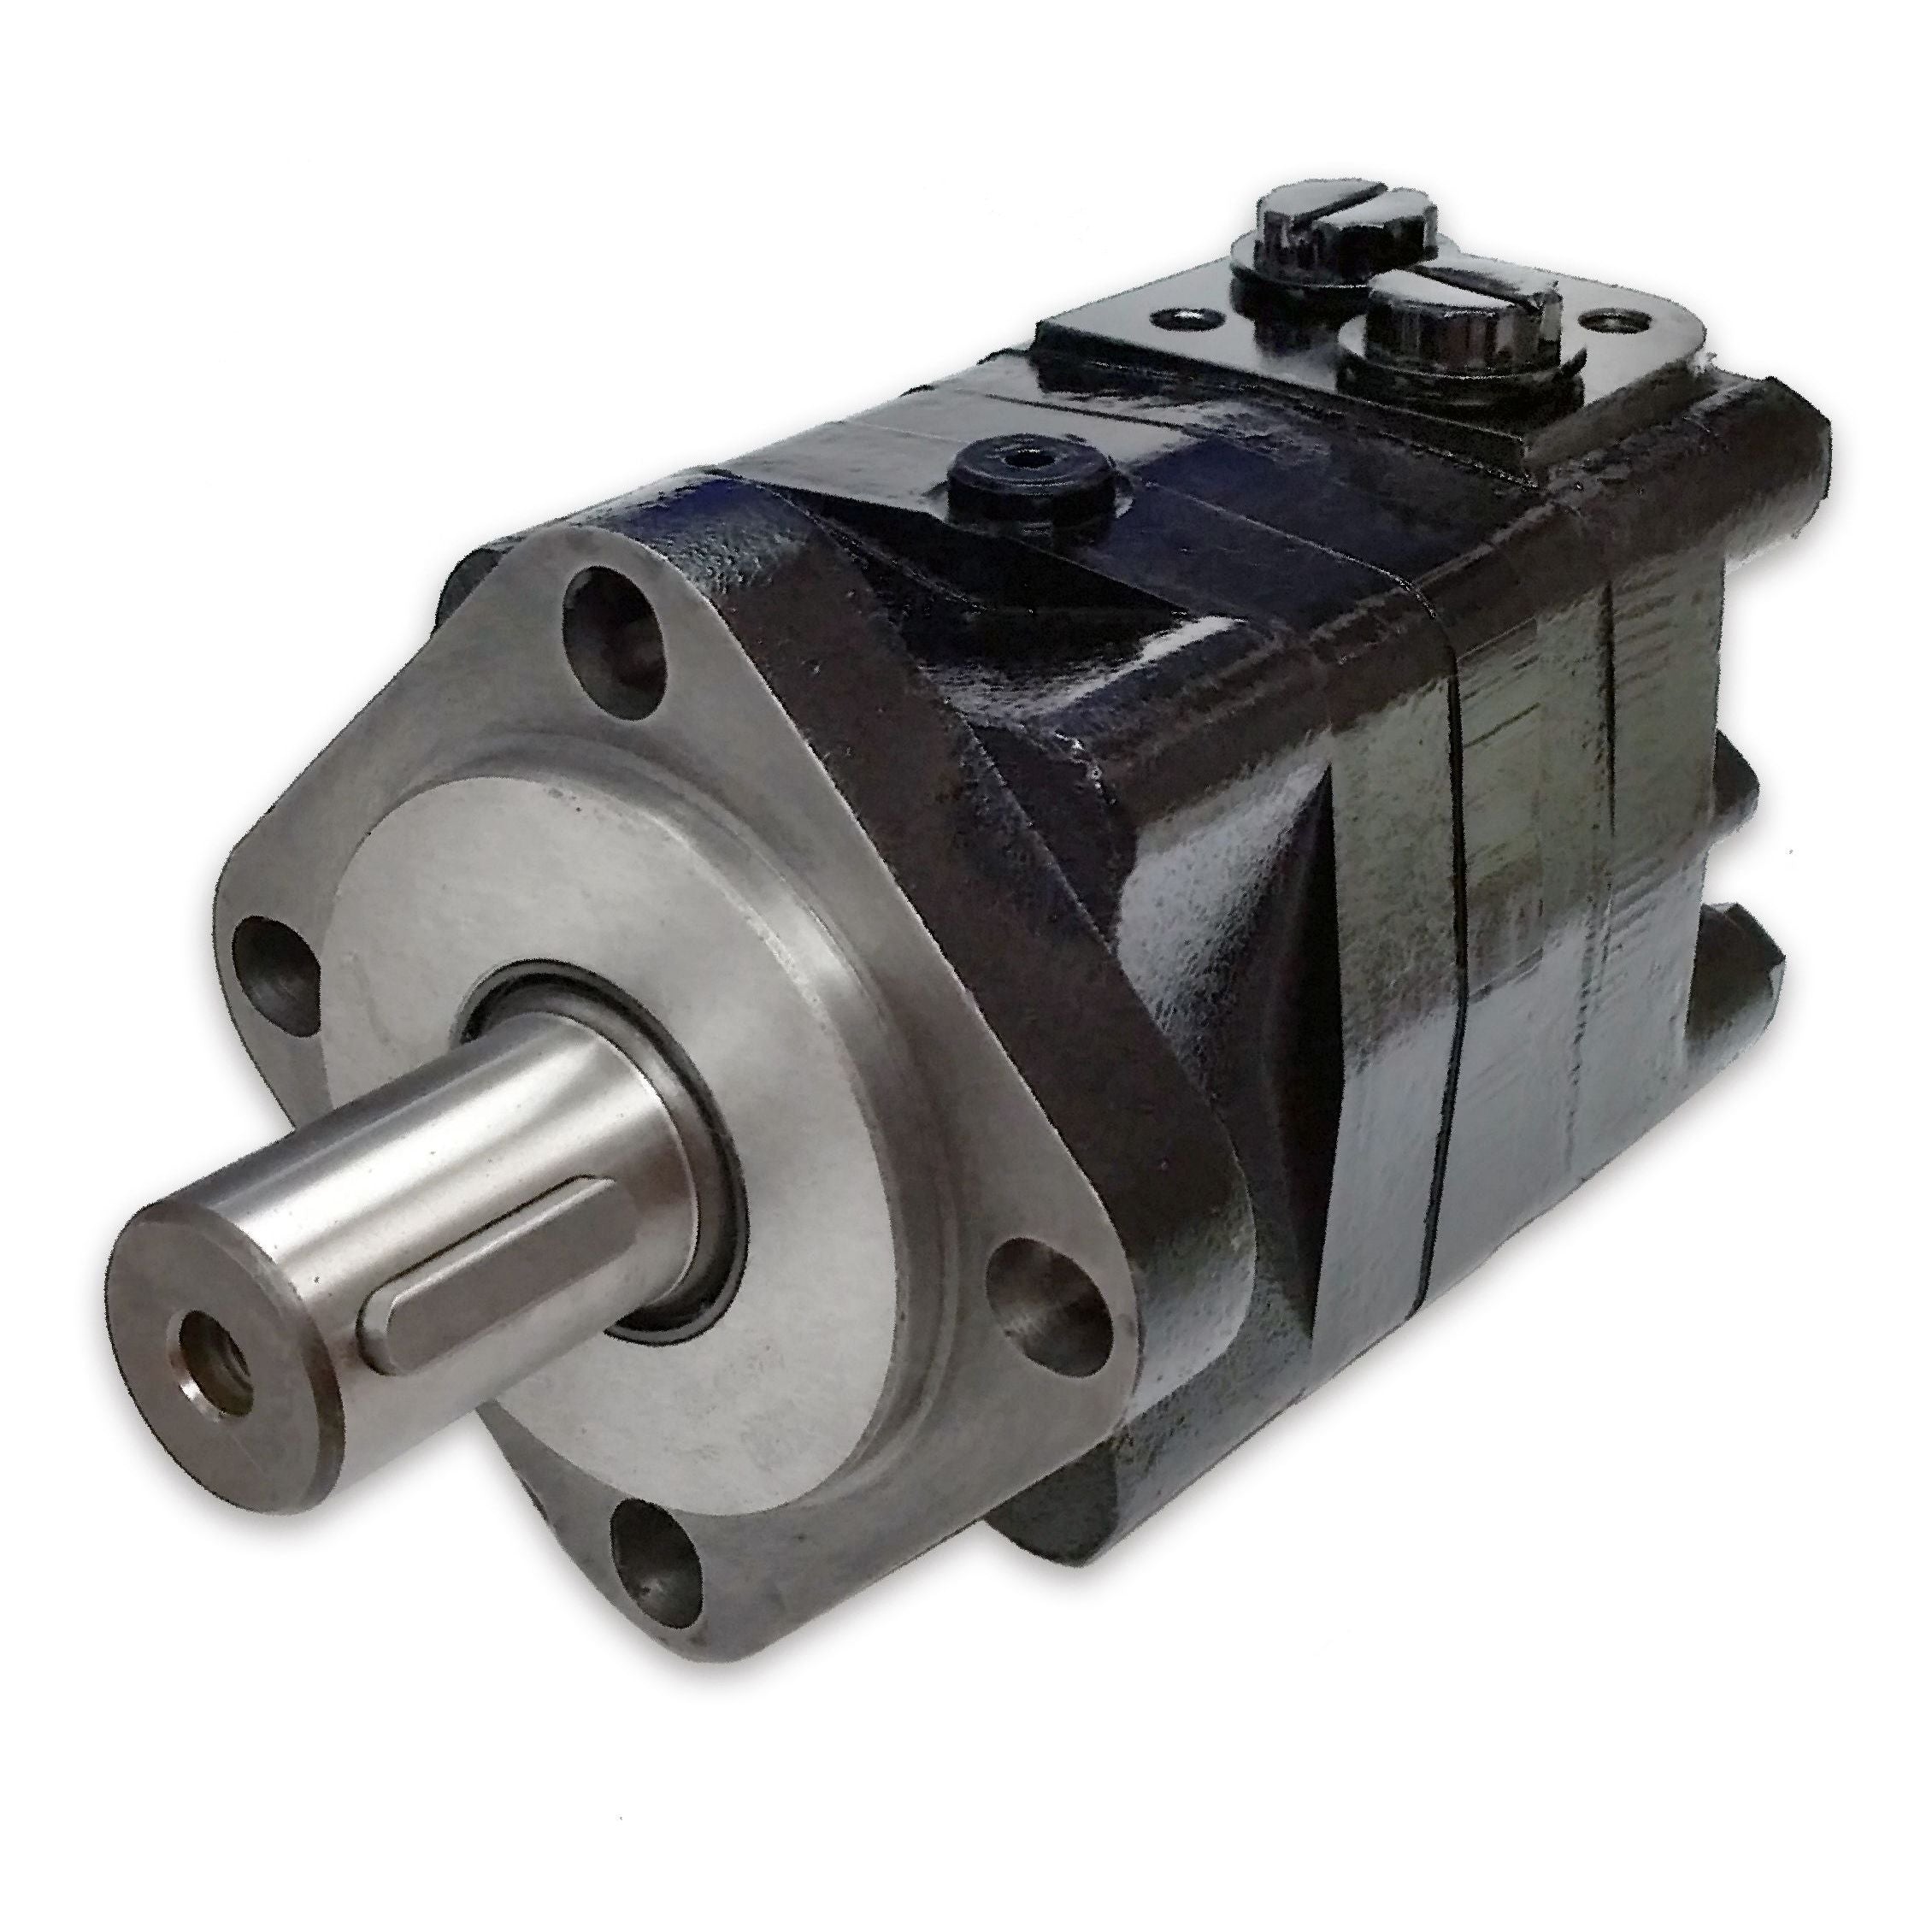 BMSY-100-E4-G-S : Dynamic LSHT Motor, 101cc, 748RPM, 2566in-lb, 2973psi Differential, 19.81GPM, SAE A 4-Bolt Mount, 1.25" Bore x 5/16" Key Shaft, Side Ported, #10 SAE (5/8")